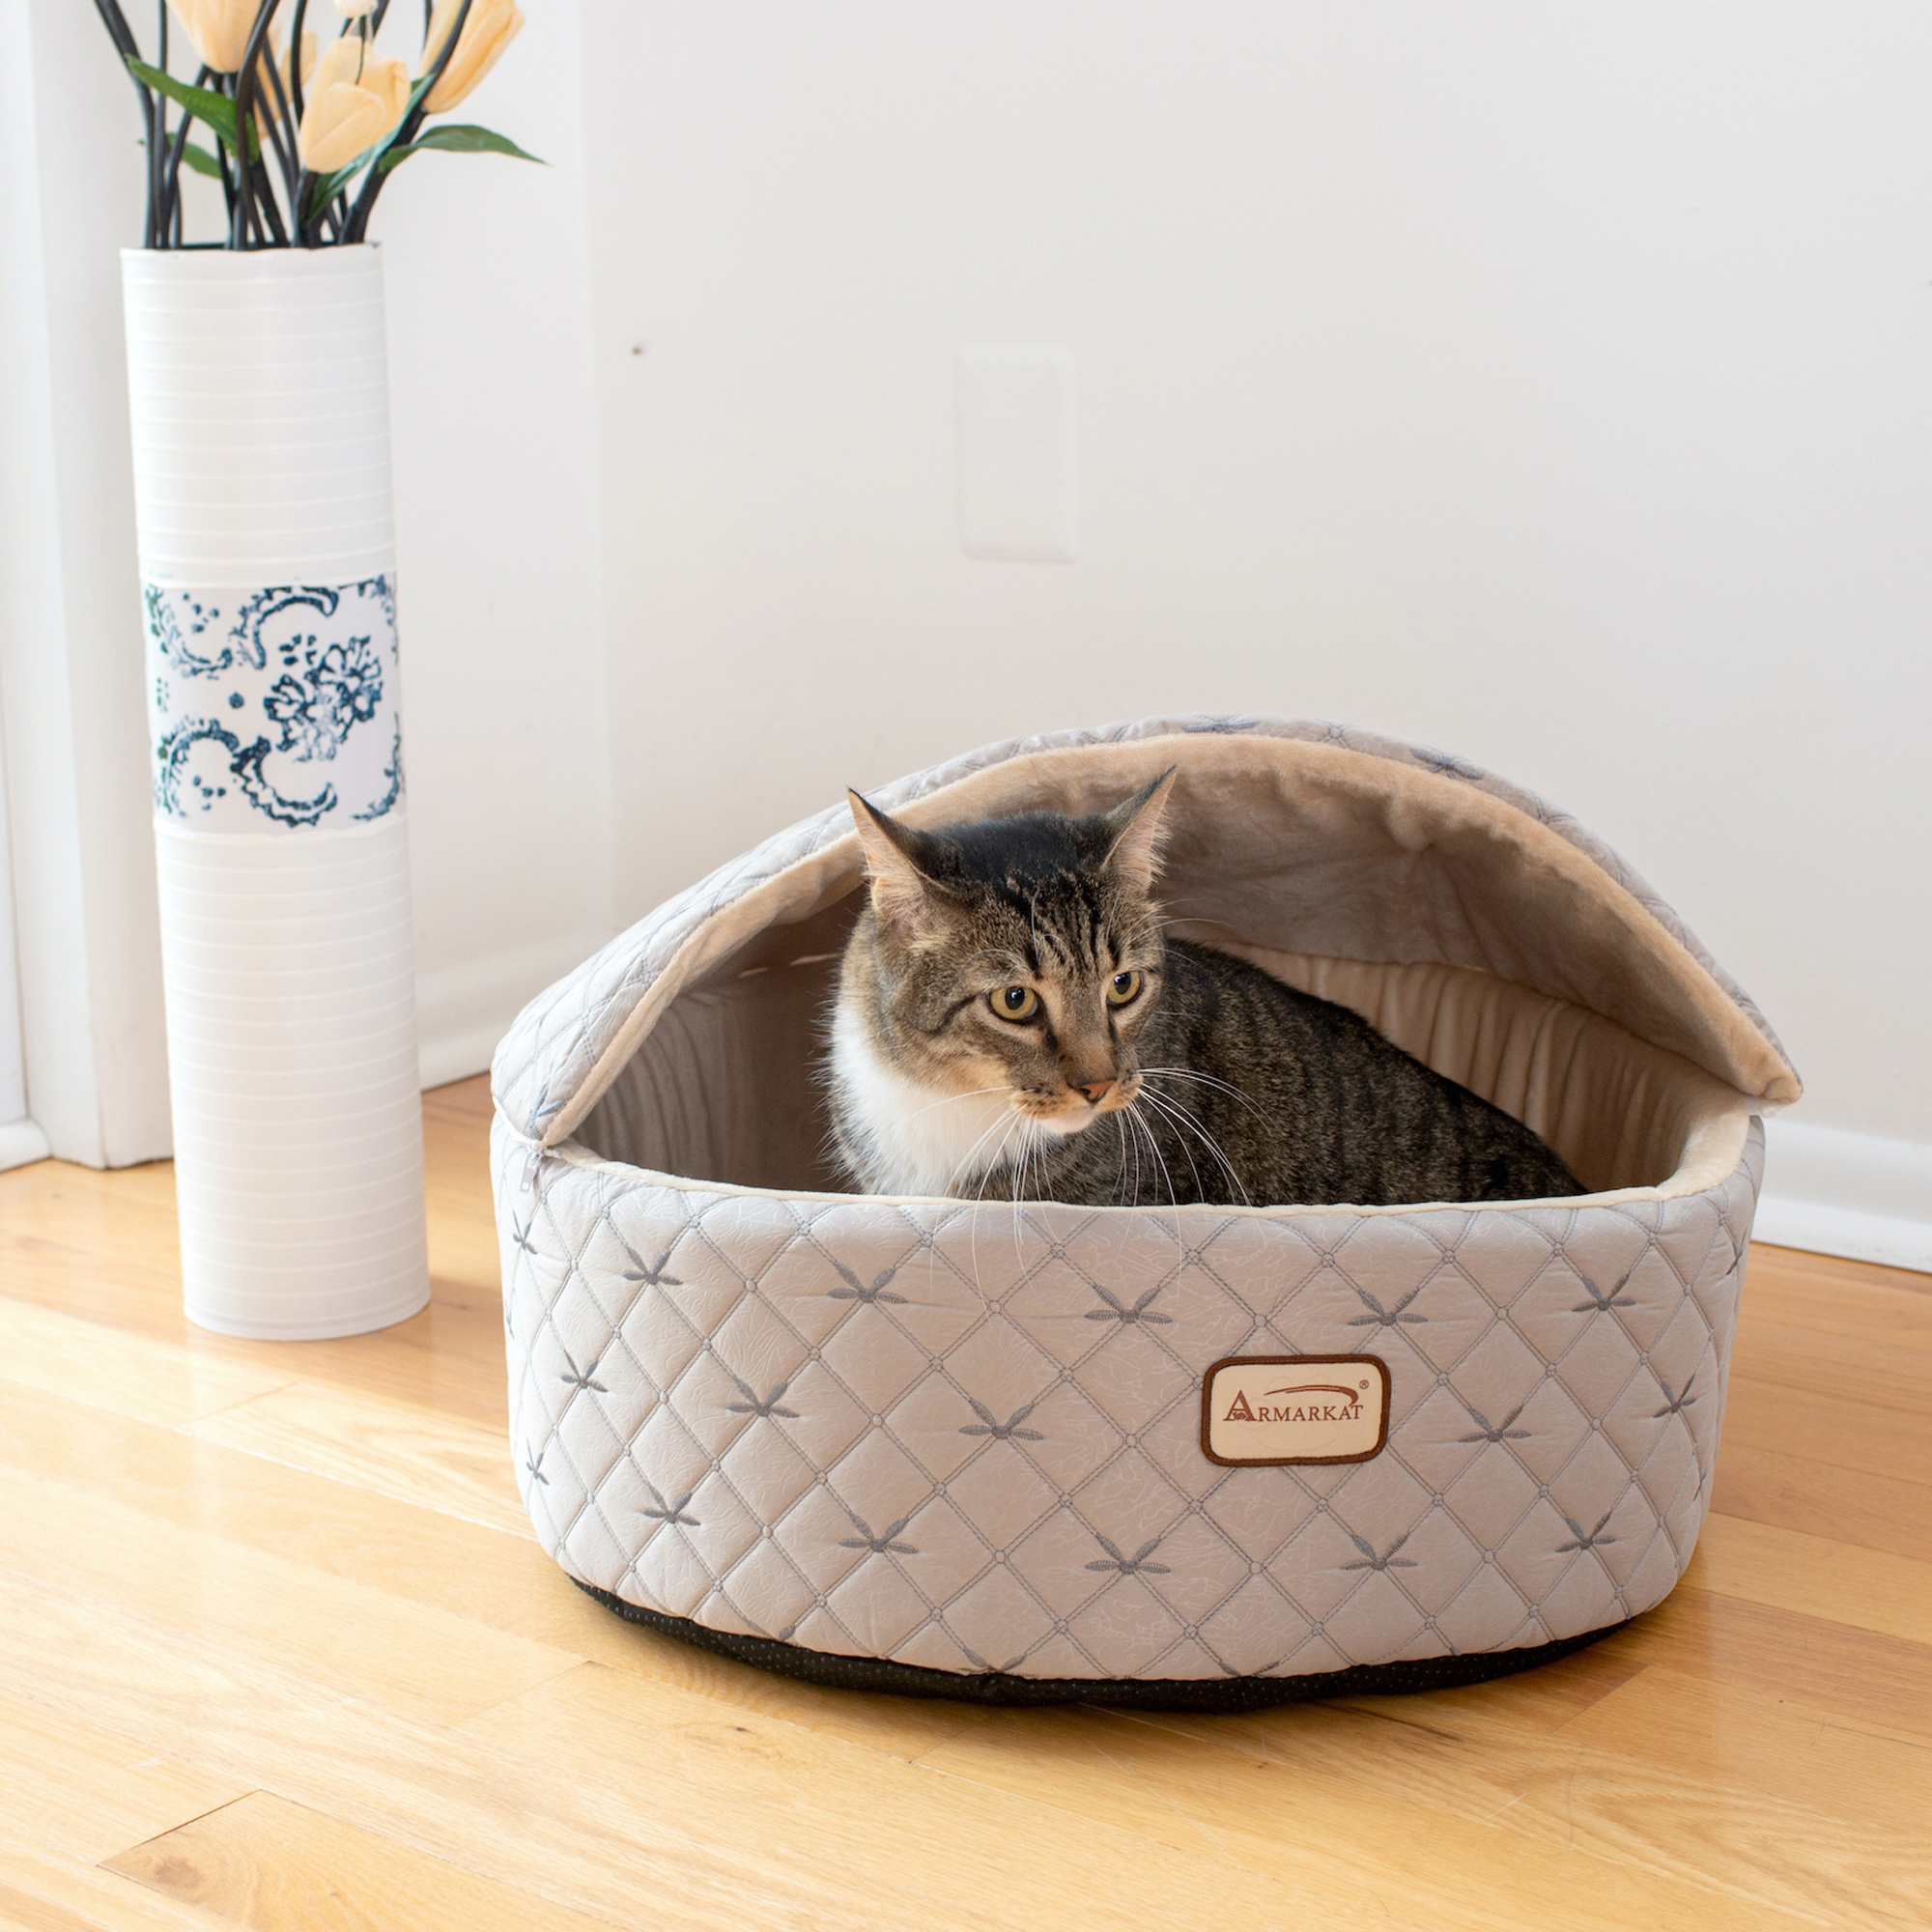 C33hqh-mh-m Armarkat Cat Bed, Medium, Pale Silver And Beige C33hqh-mh-m